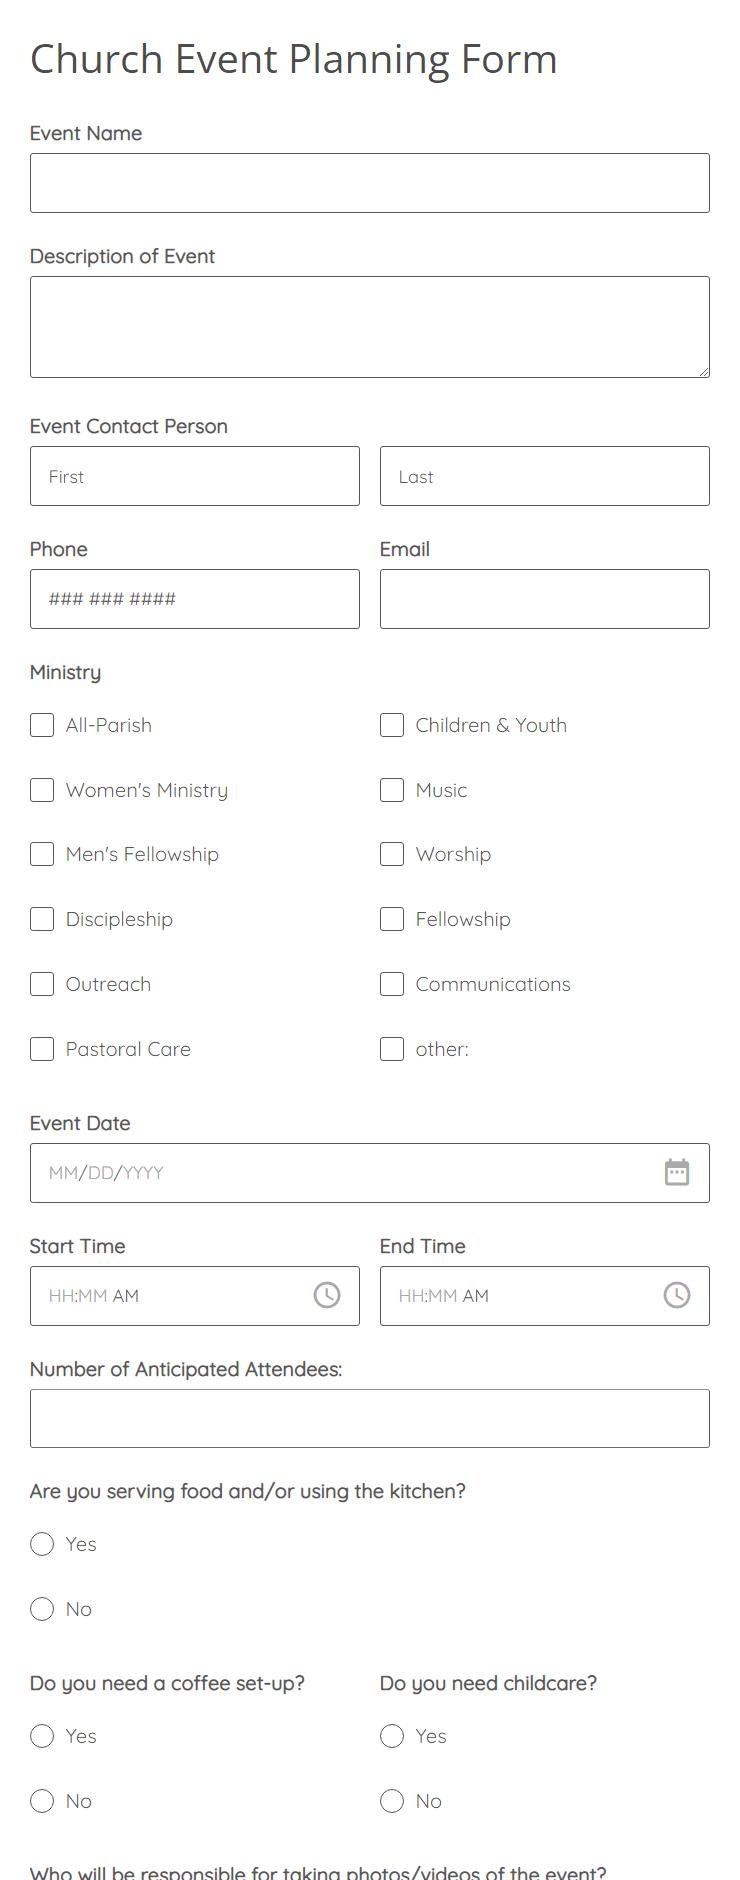 church-event-planning-form-template-123formbuilder